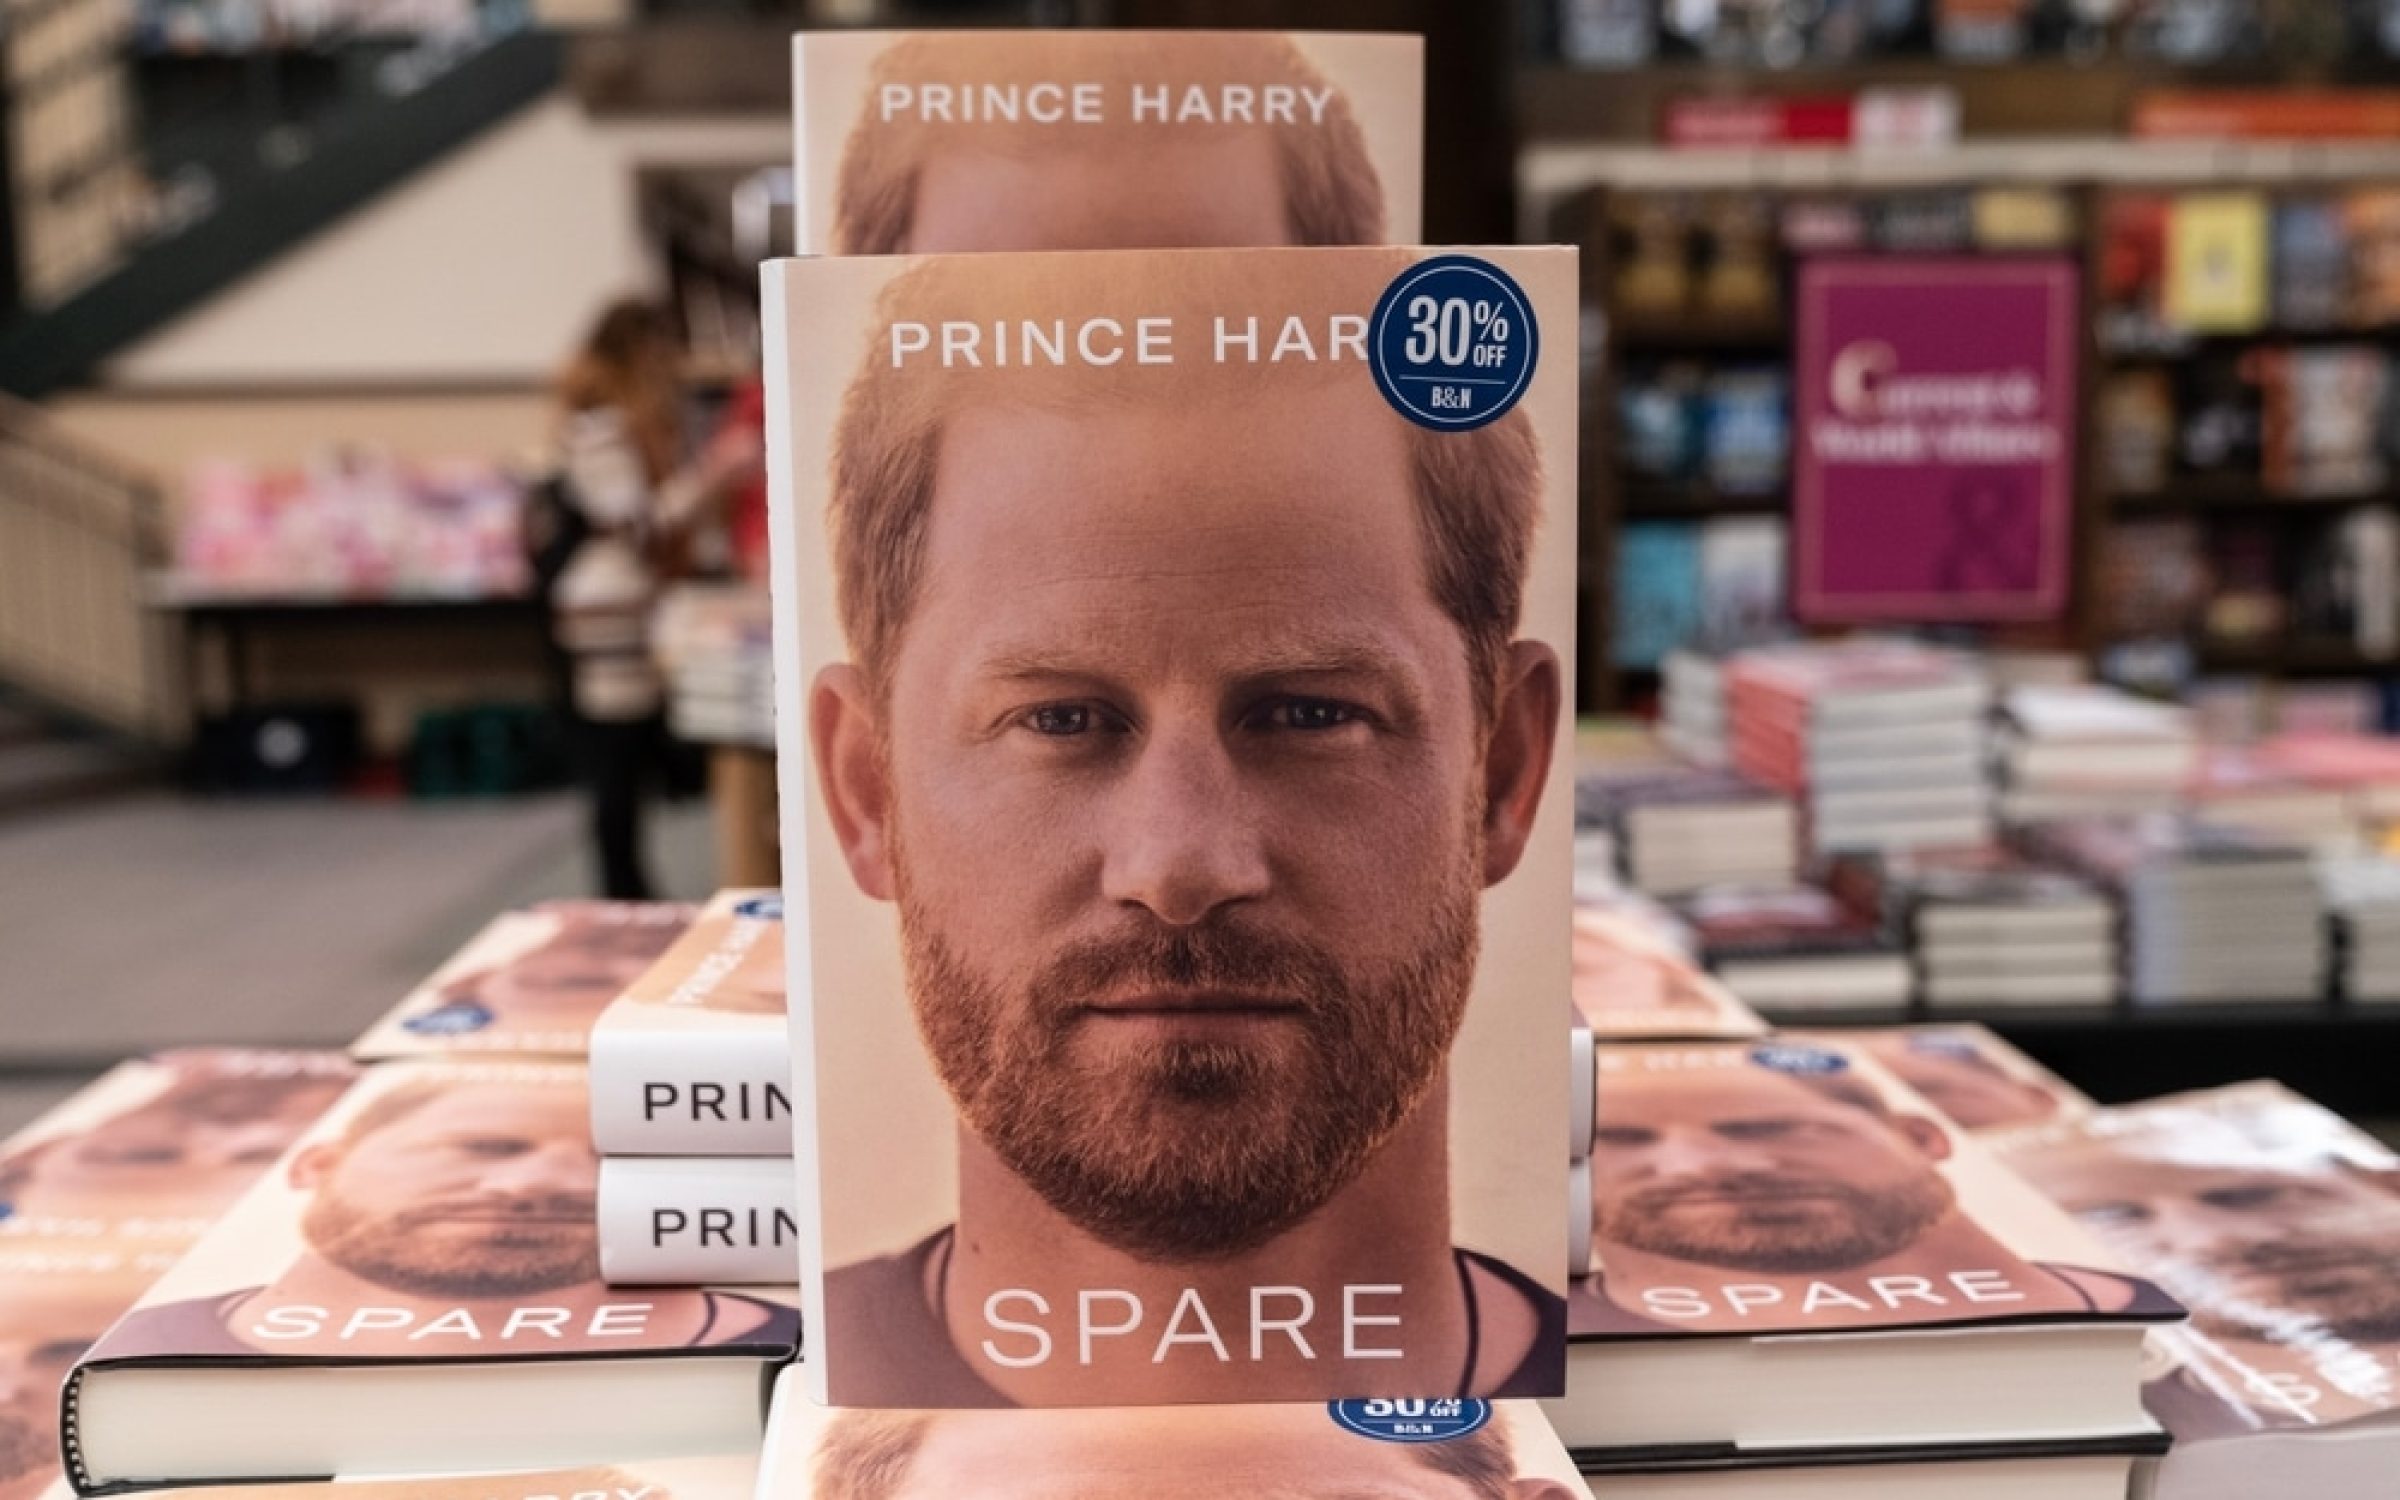 Prince harry's book Spare in bookshop